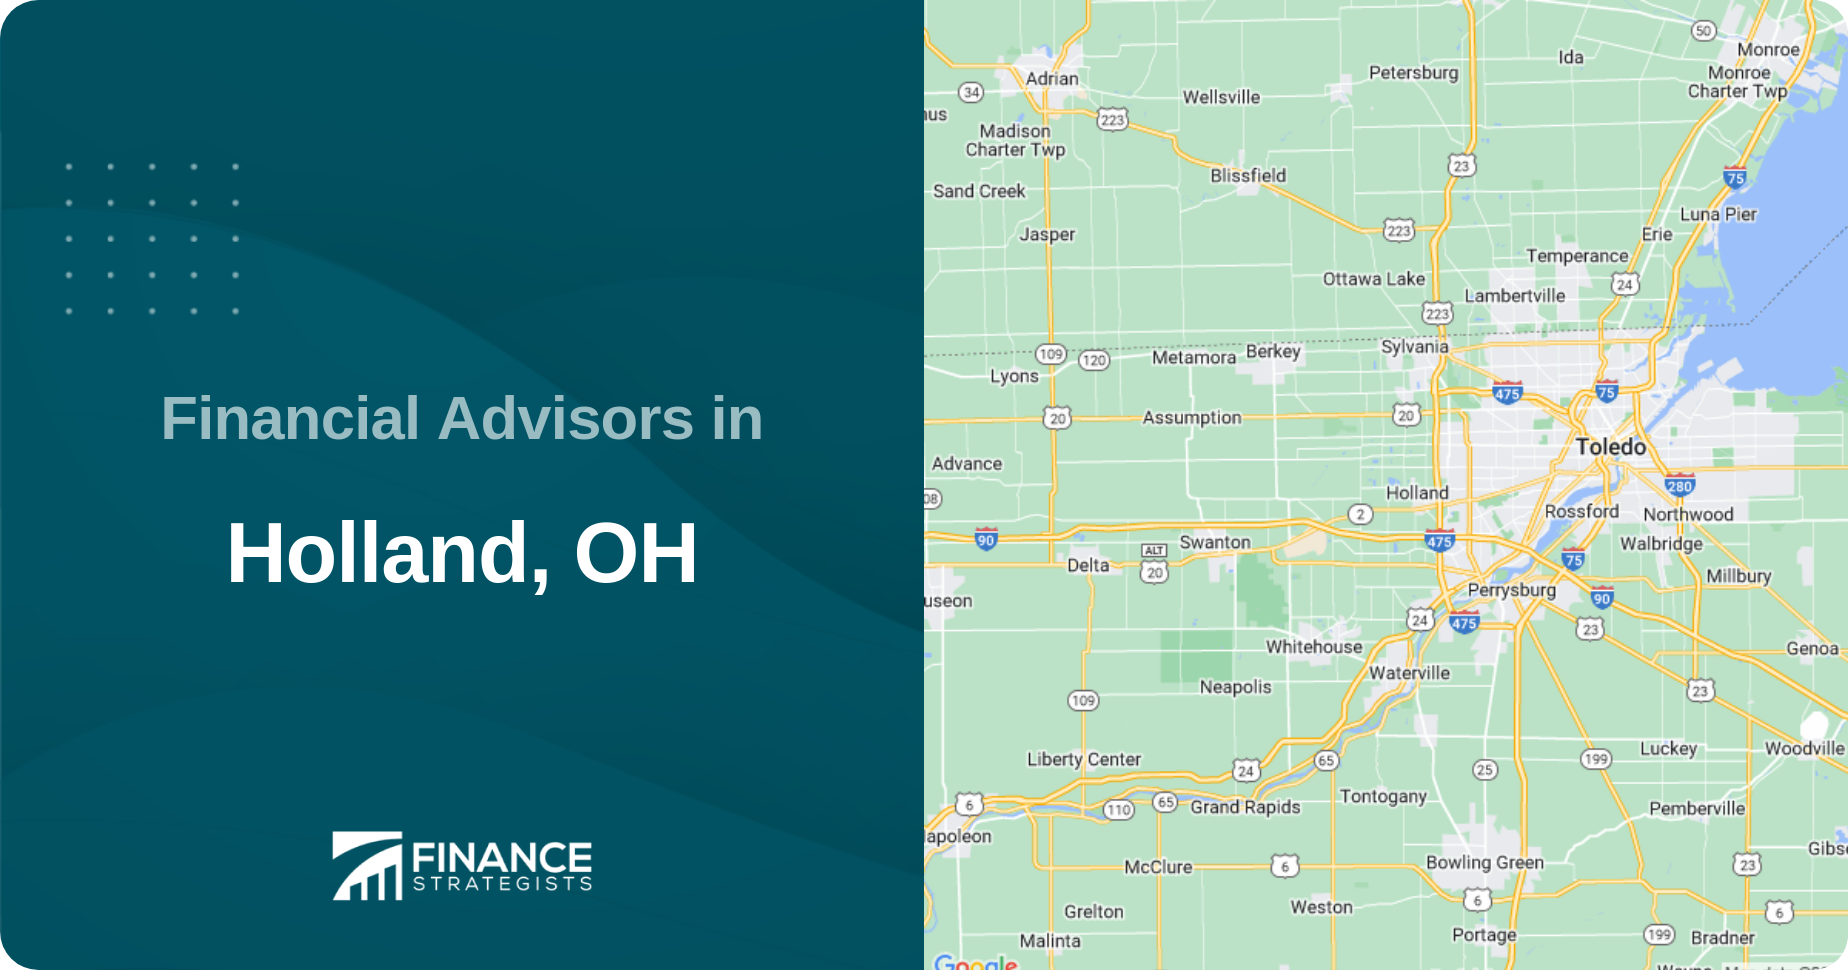 Financial Advisors in Holland, OH